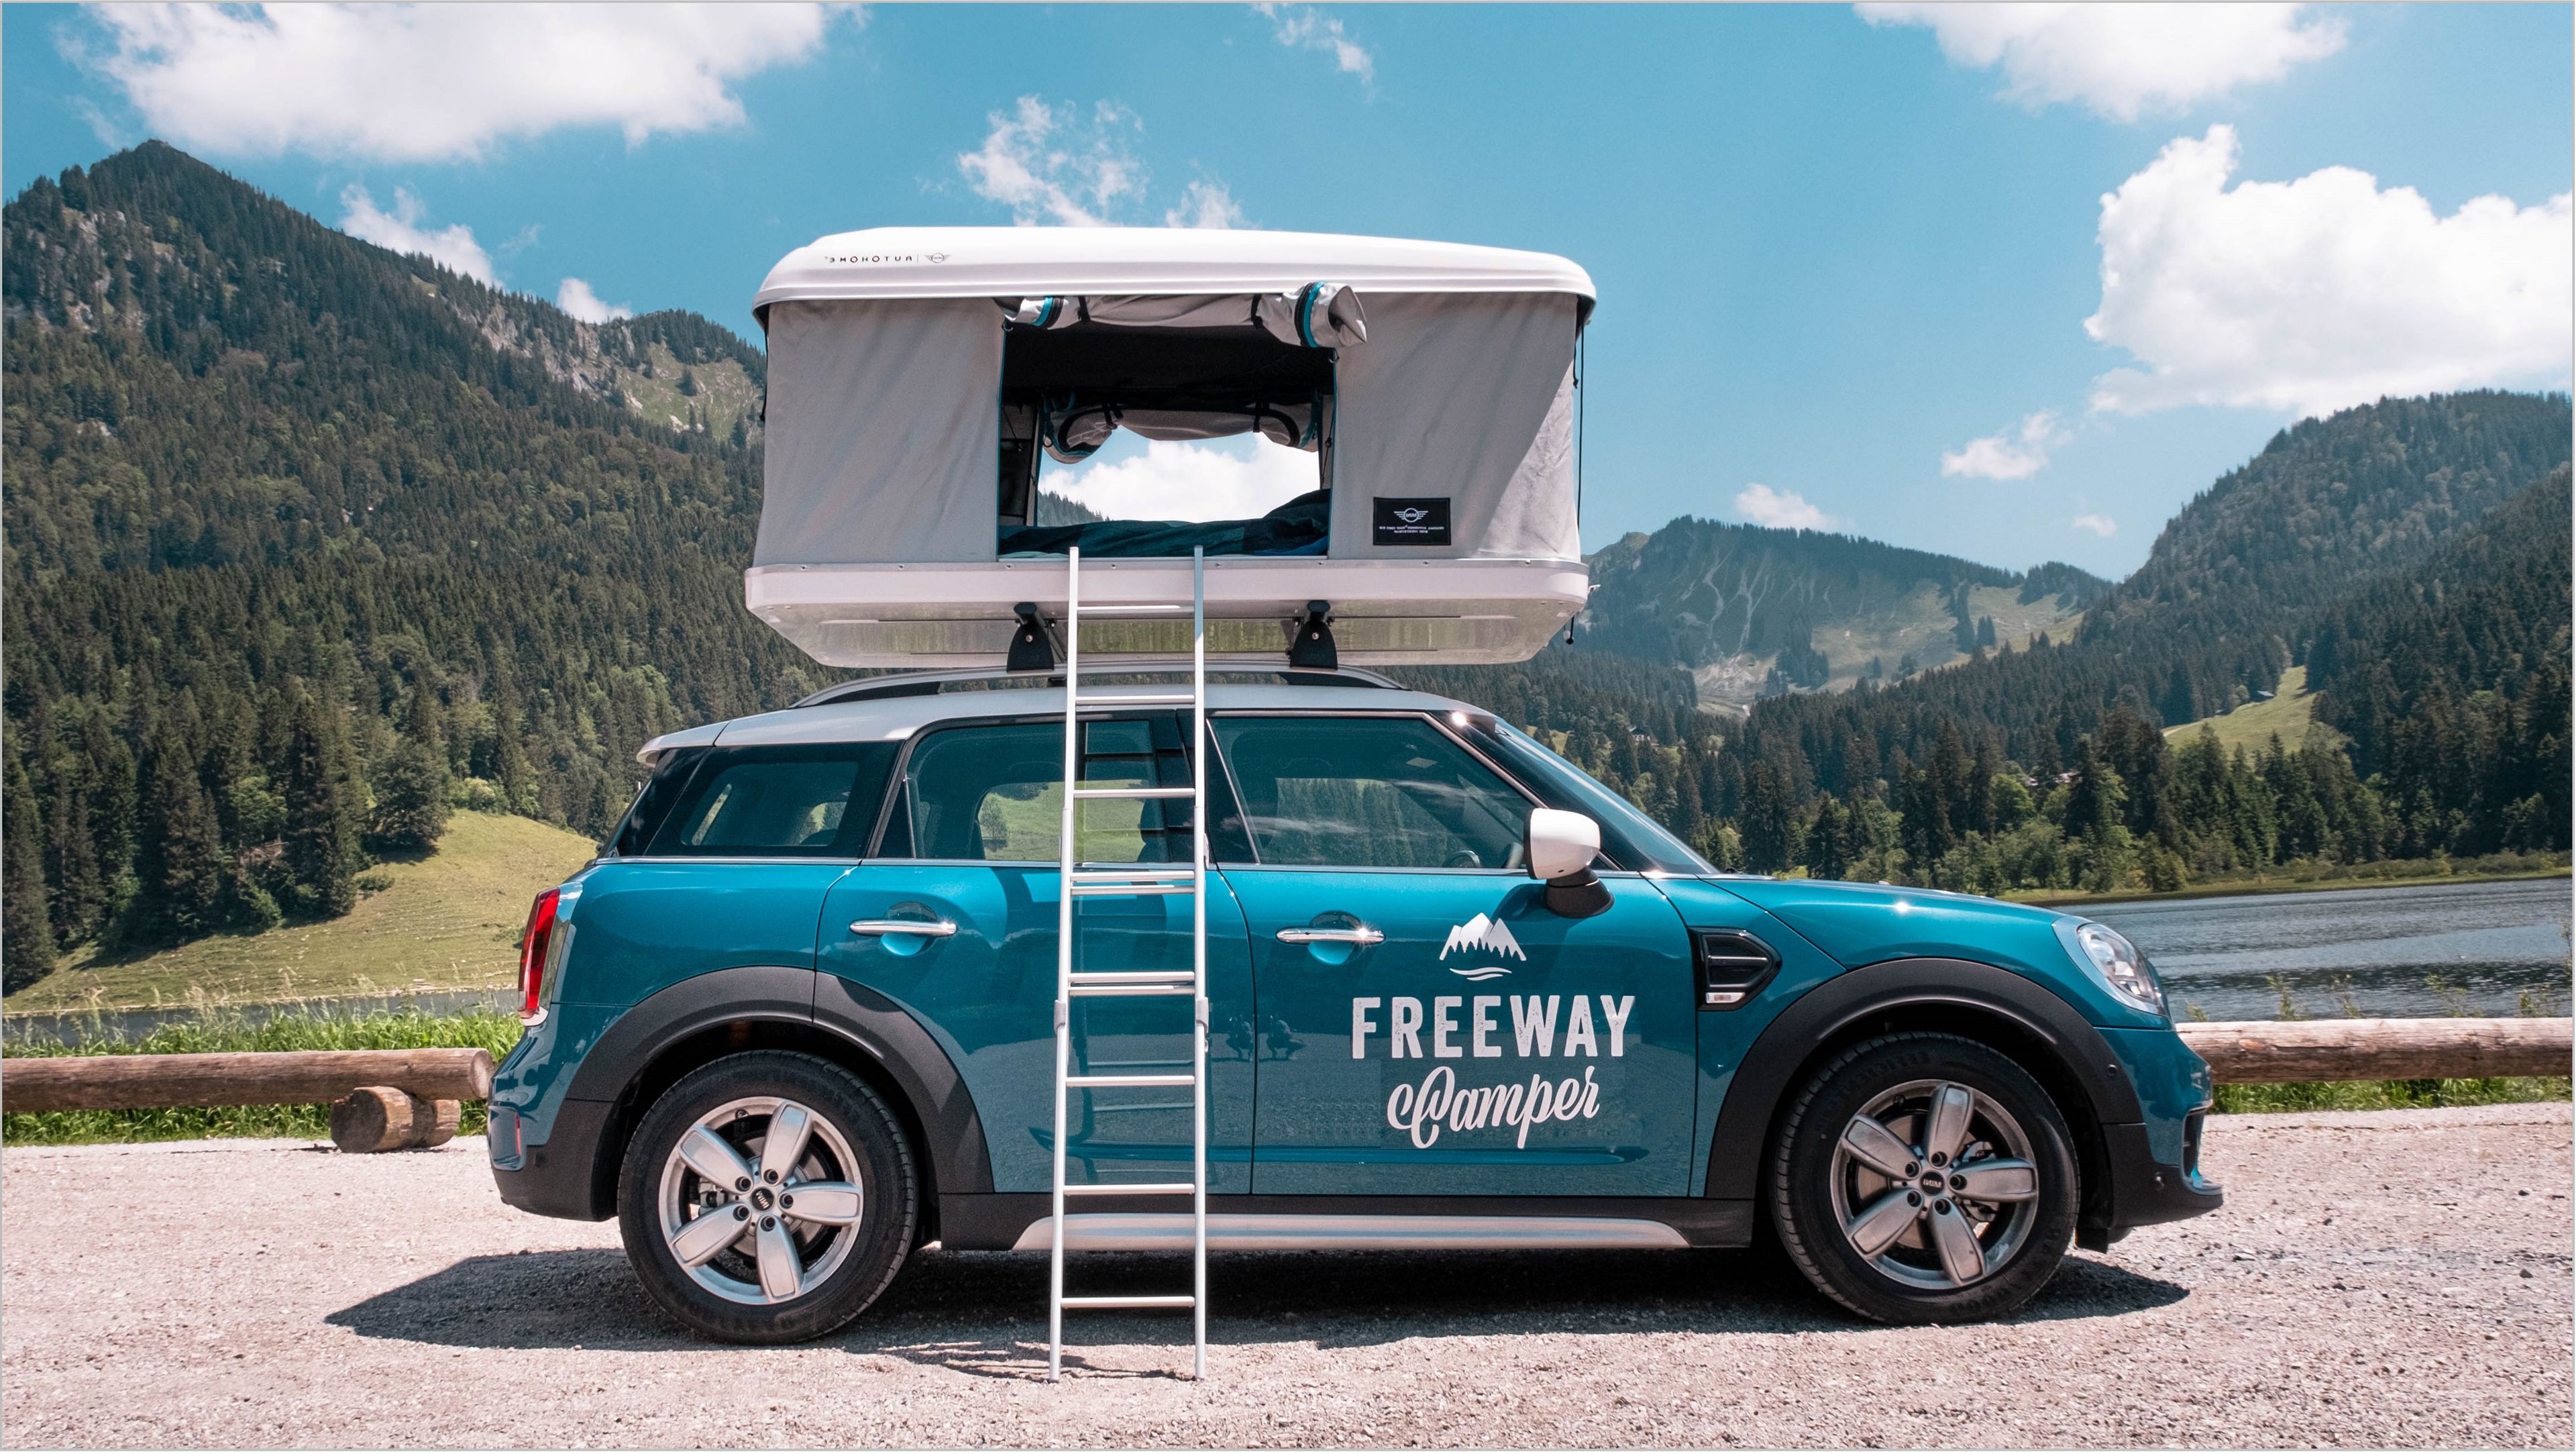 Blue FWC Mini Countryman with roof tent stands in the mountains by a lake.